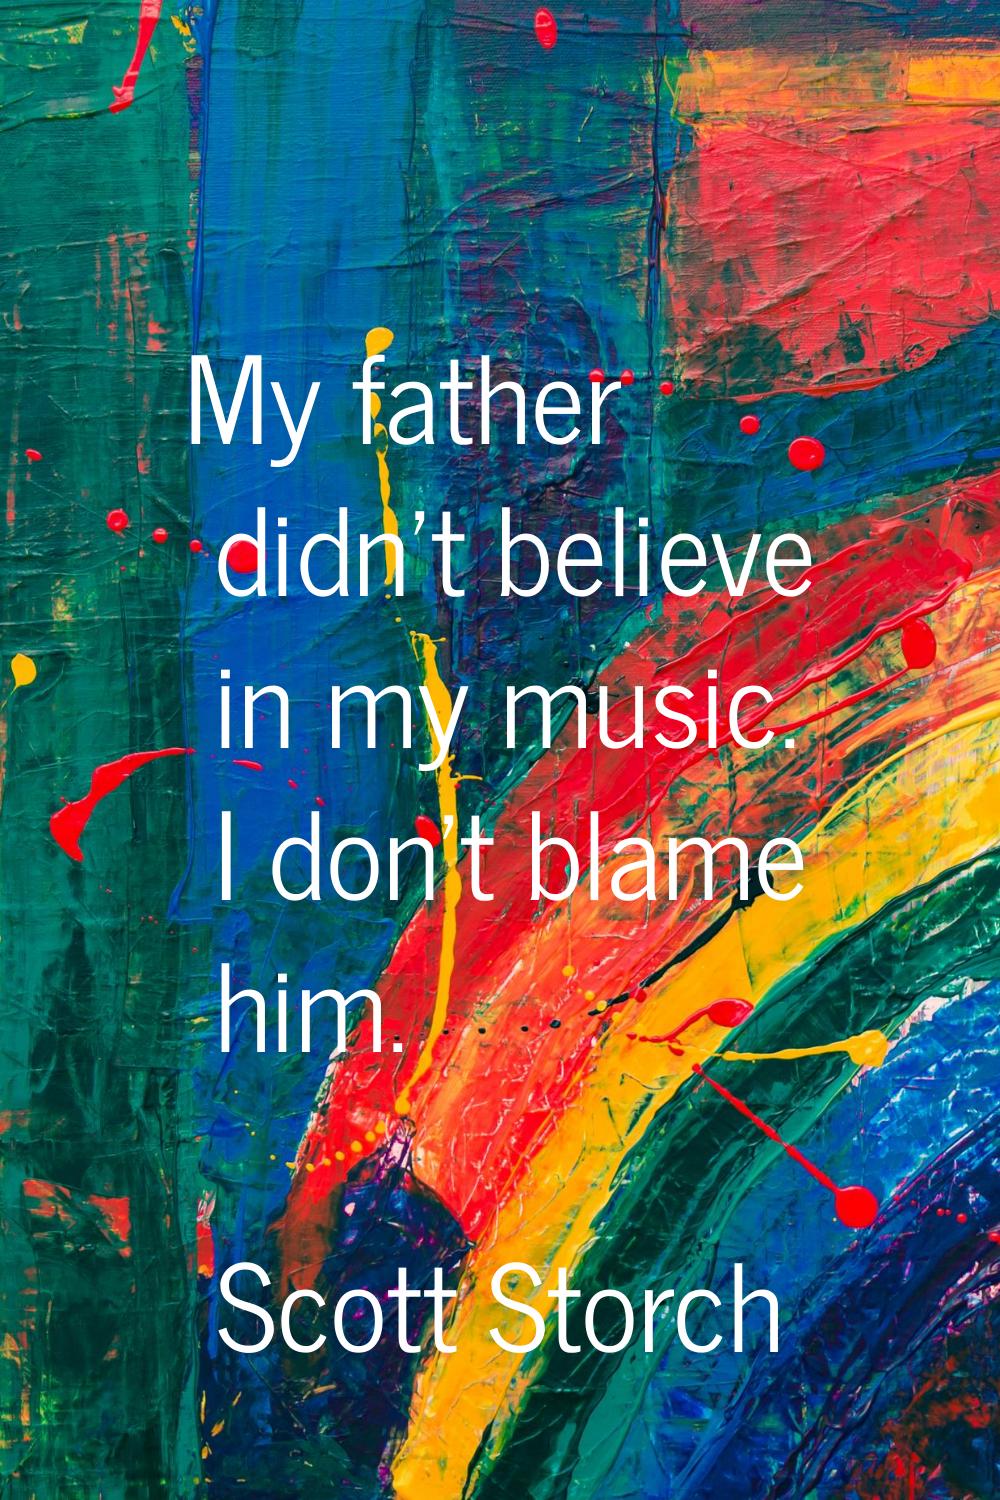 My father didn't believe in my music. I don't blame him.